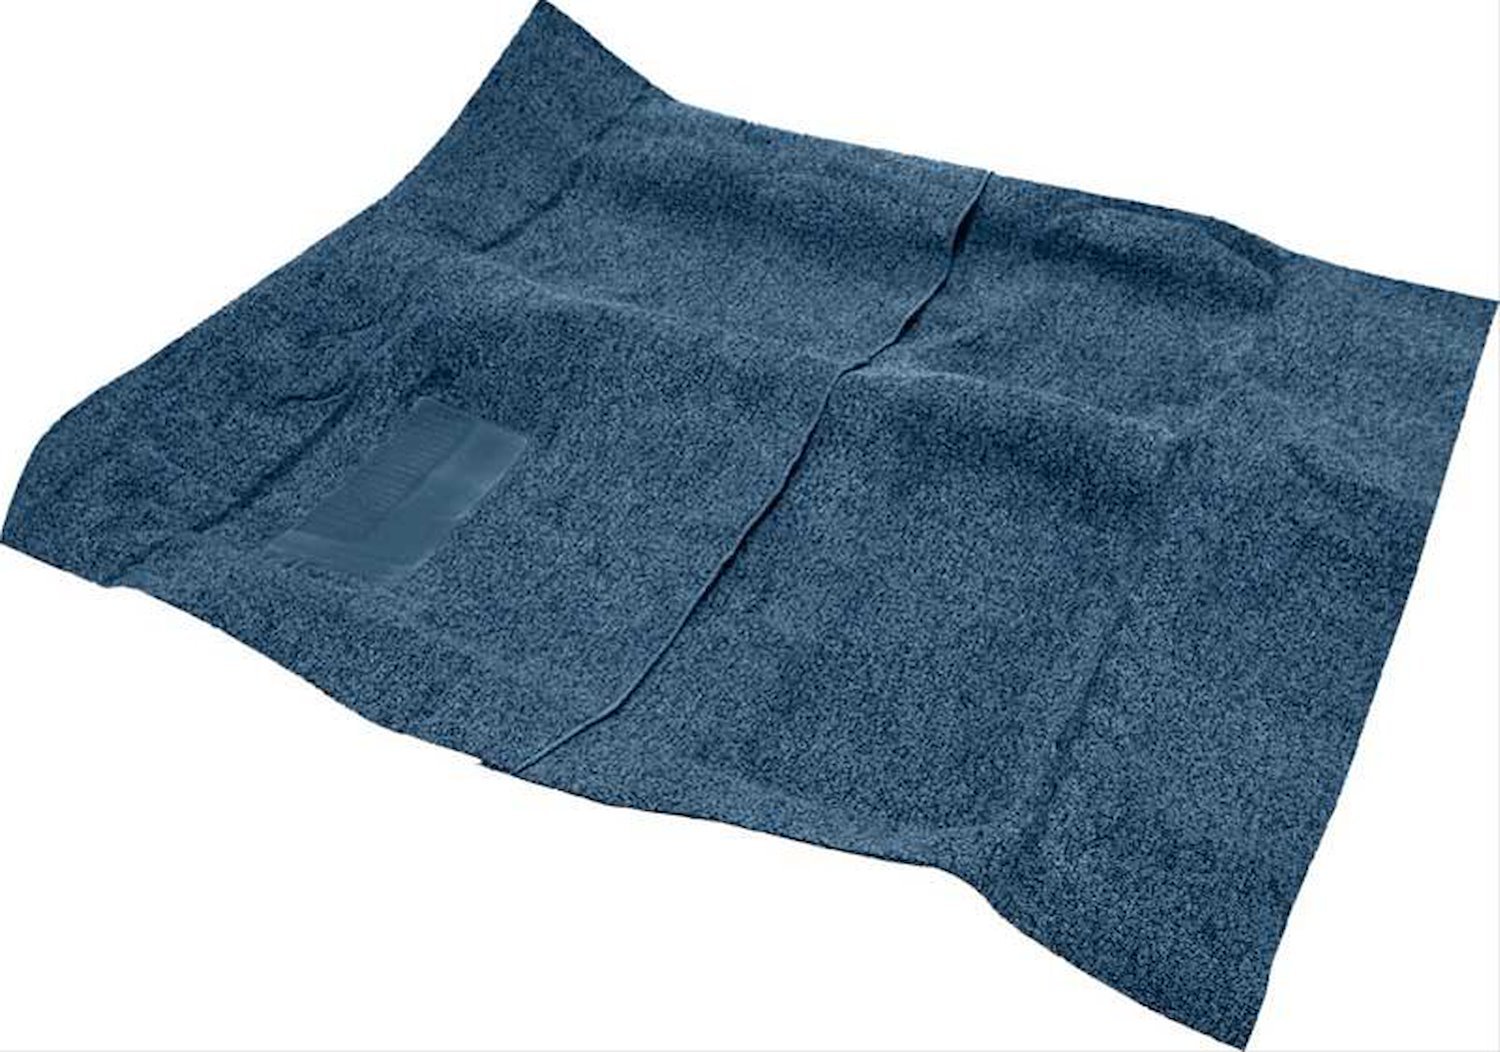 MB990818 Cut Pile Carpet 1974 Dodge Charger With 4-Speed Ocean Blue